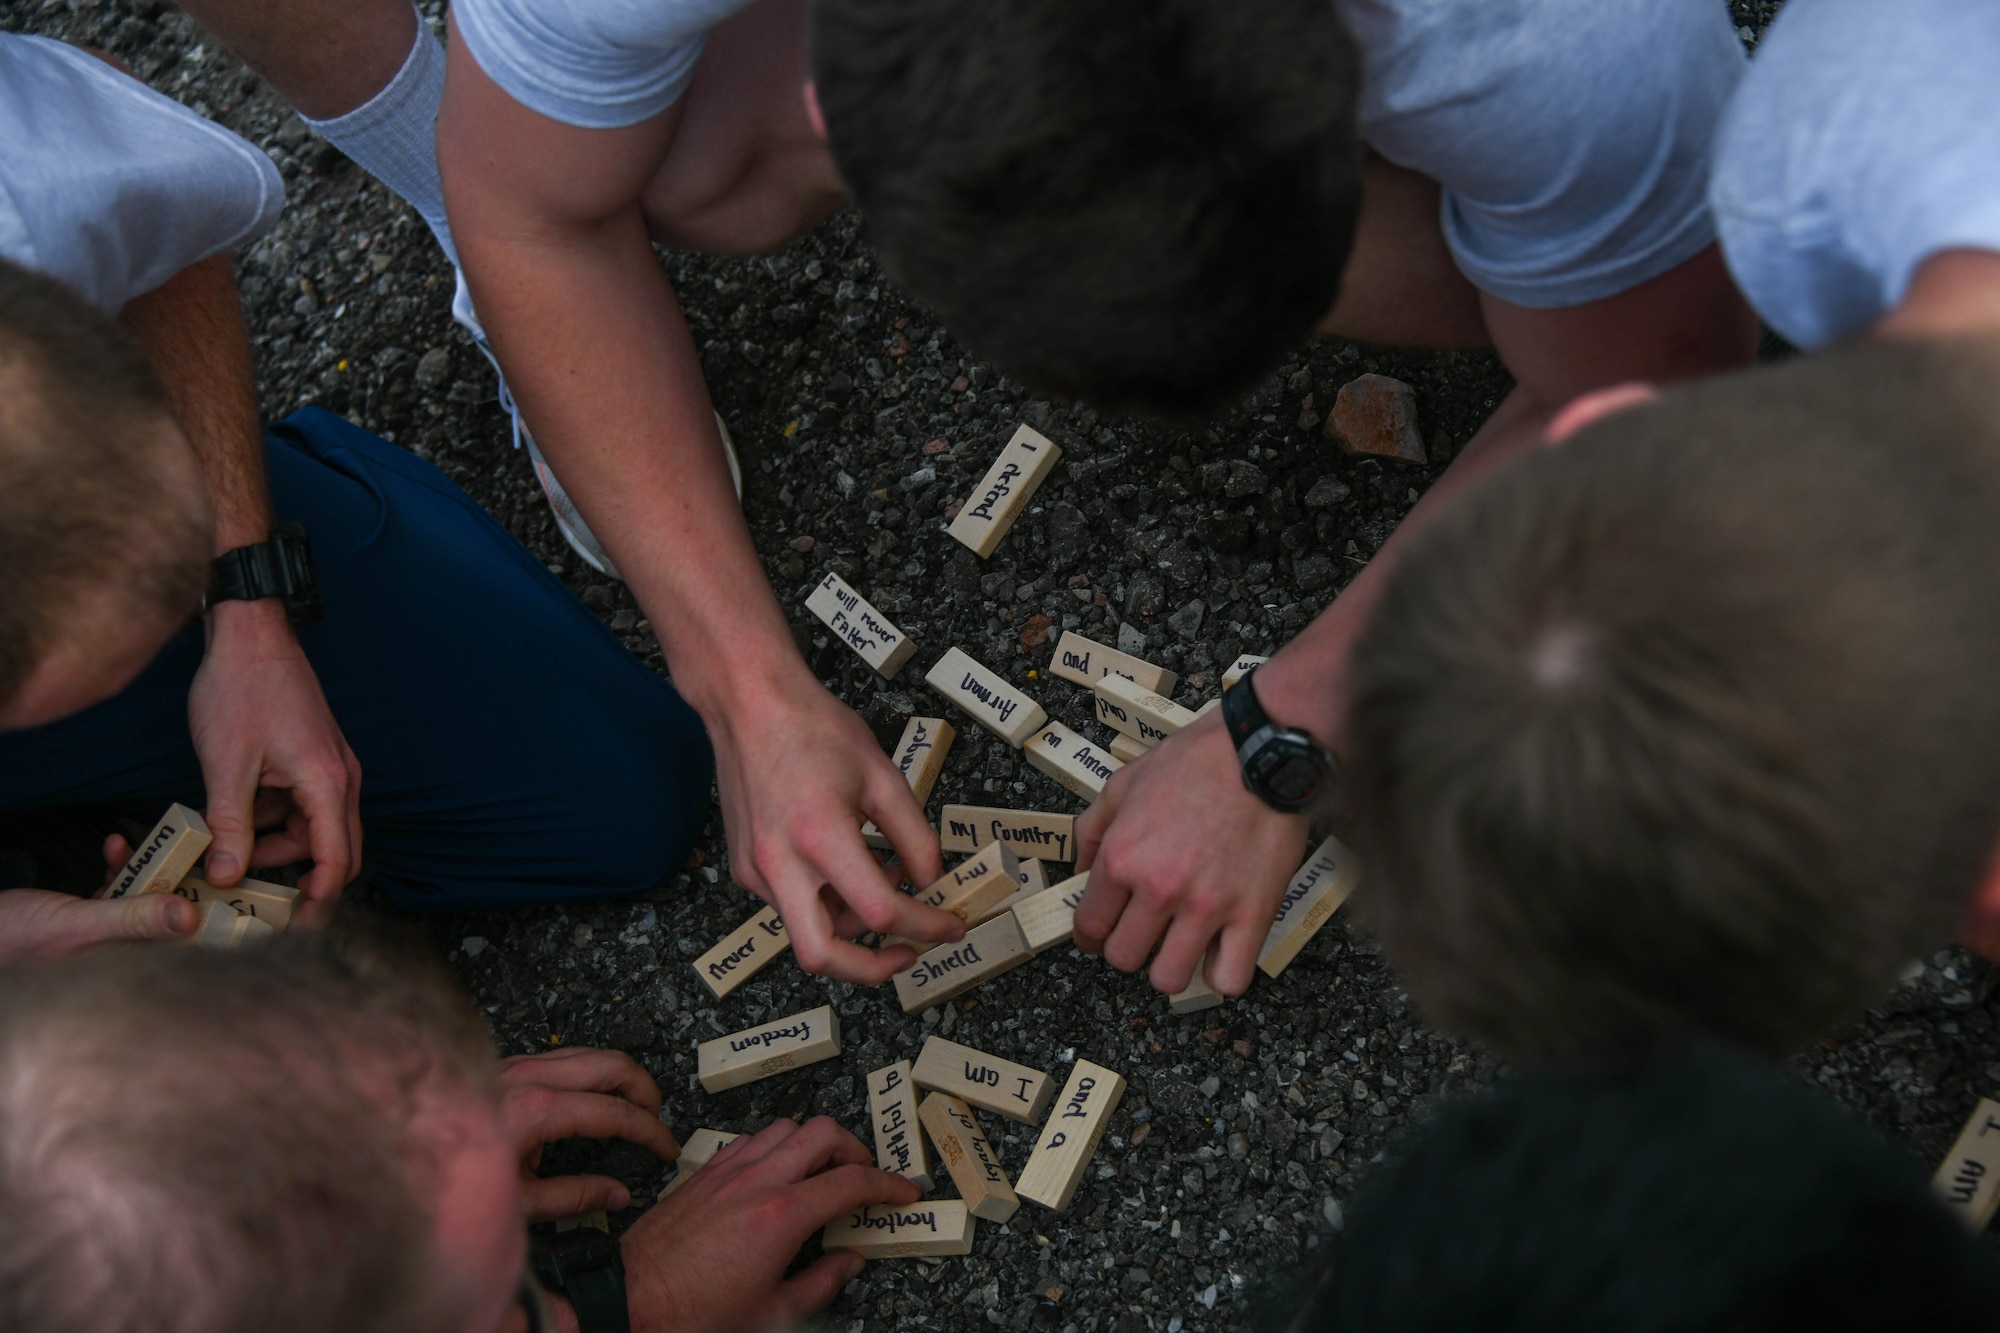 97th Training Squadron students construct the Airman’s creed with blocks at the Talon Challenge at Altus Air Force Base, Oklahoma, April 10, 2022. The events at the Talon Challenge included a buddy drag, a prisoners of war/missing in action table, an Airman’s Creed exercise, Airmanship lessons and sexual assault awareness training. (U.S. Air Force photo by Airman 1st Class Trenton Jancze)